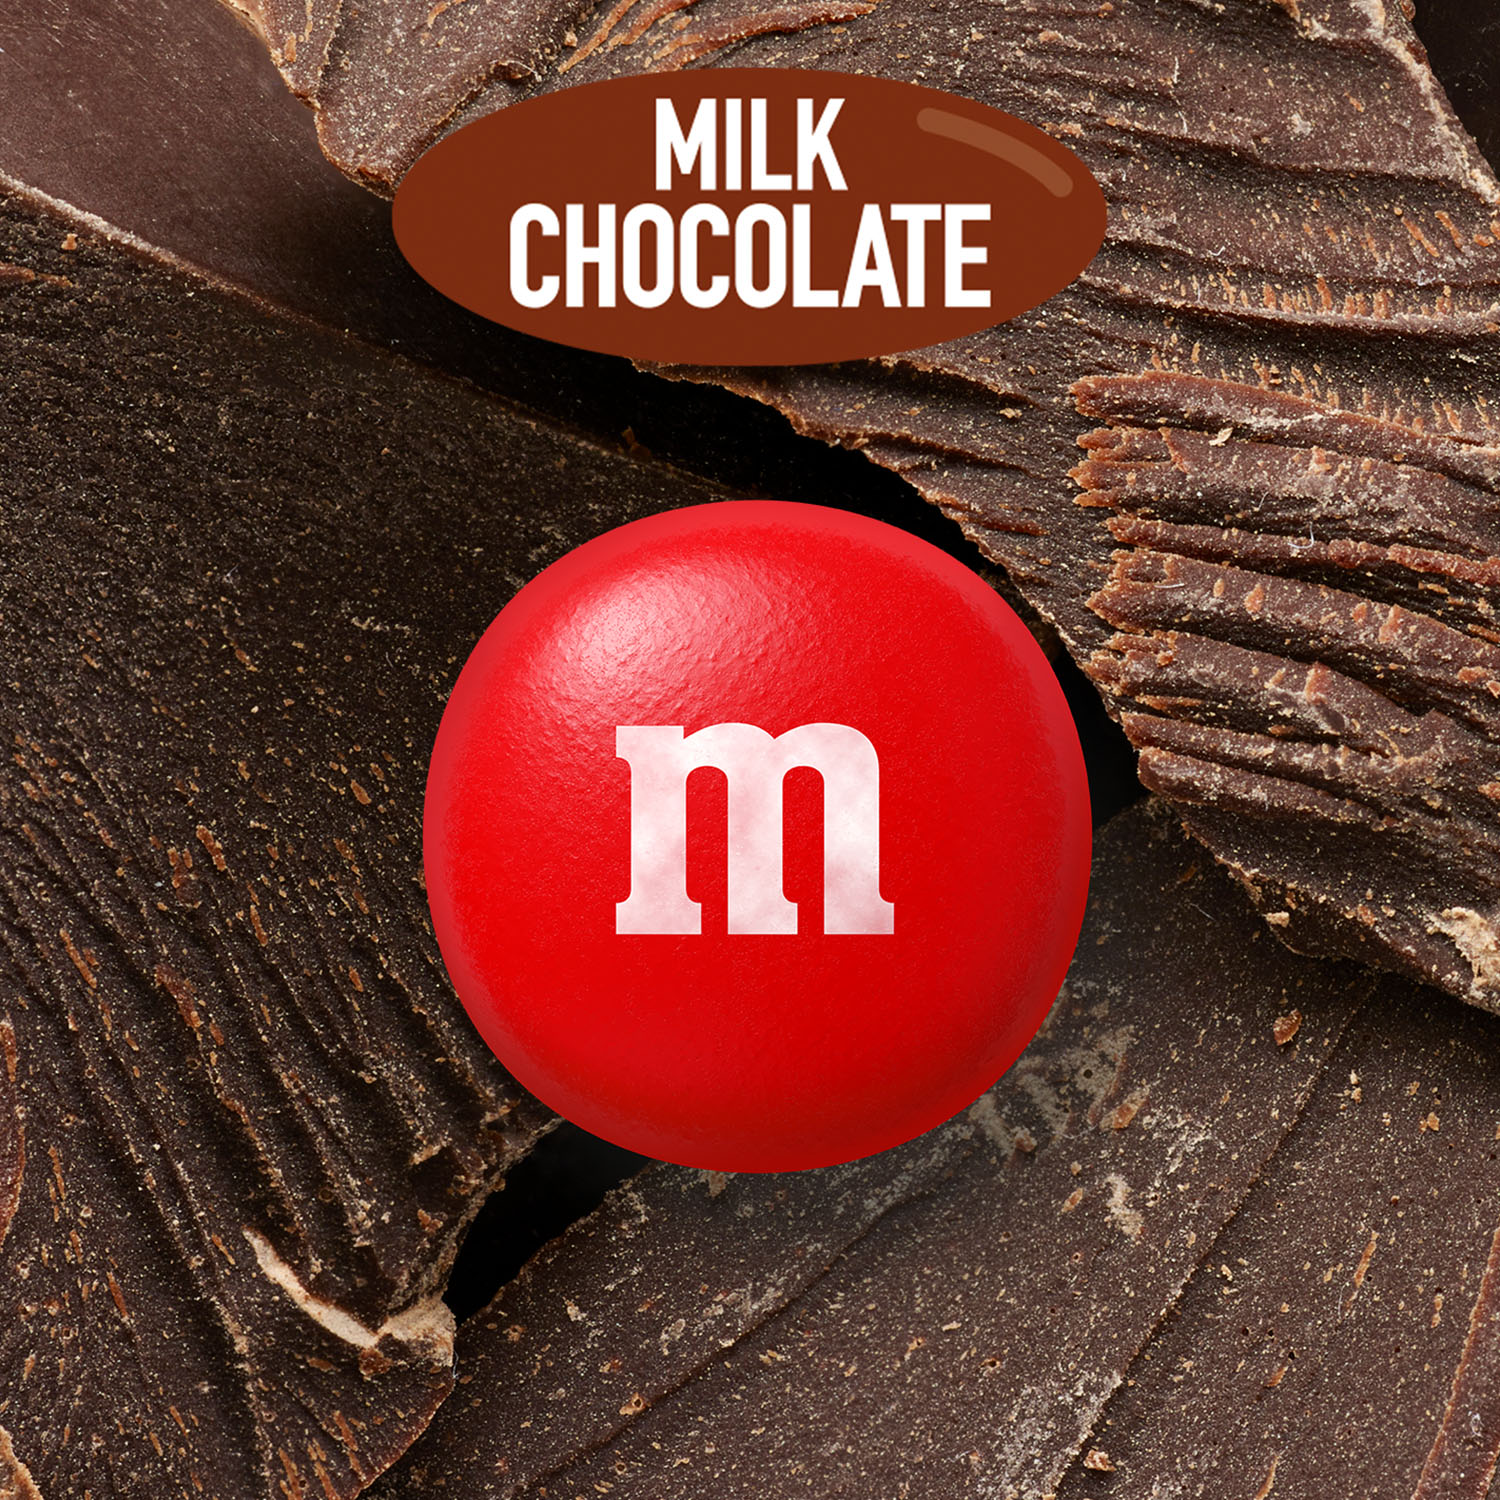 M&M's Milk Chocolate Candy, Share Size - 3.14 oz Bag - image 3 of 12